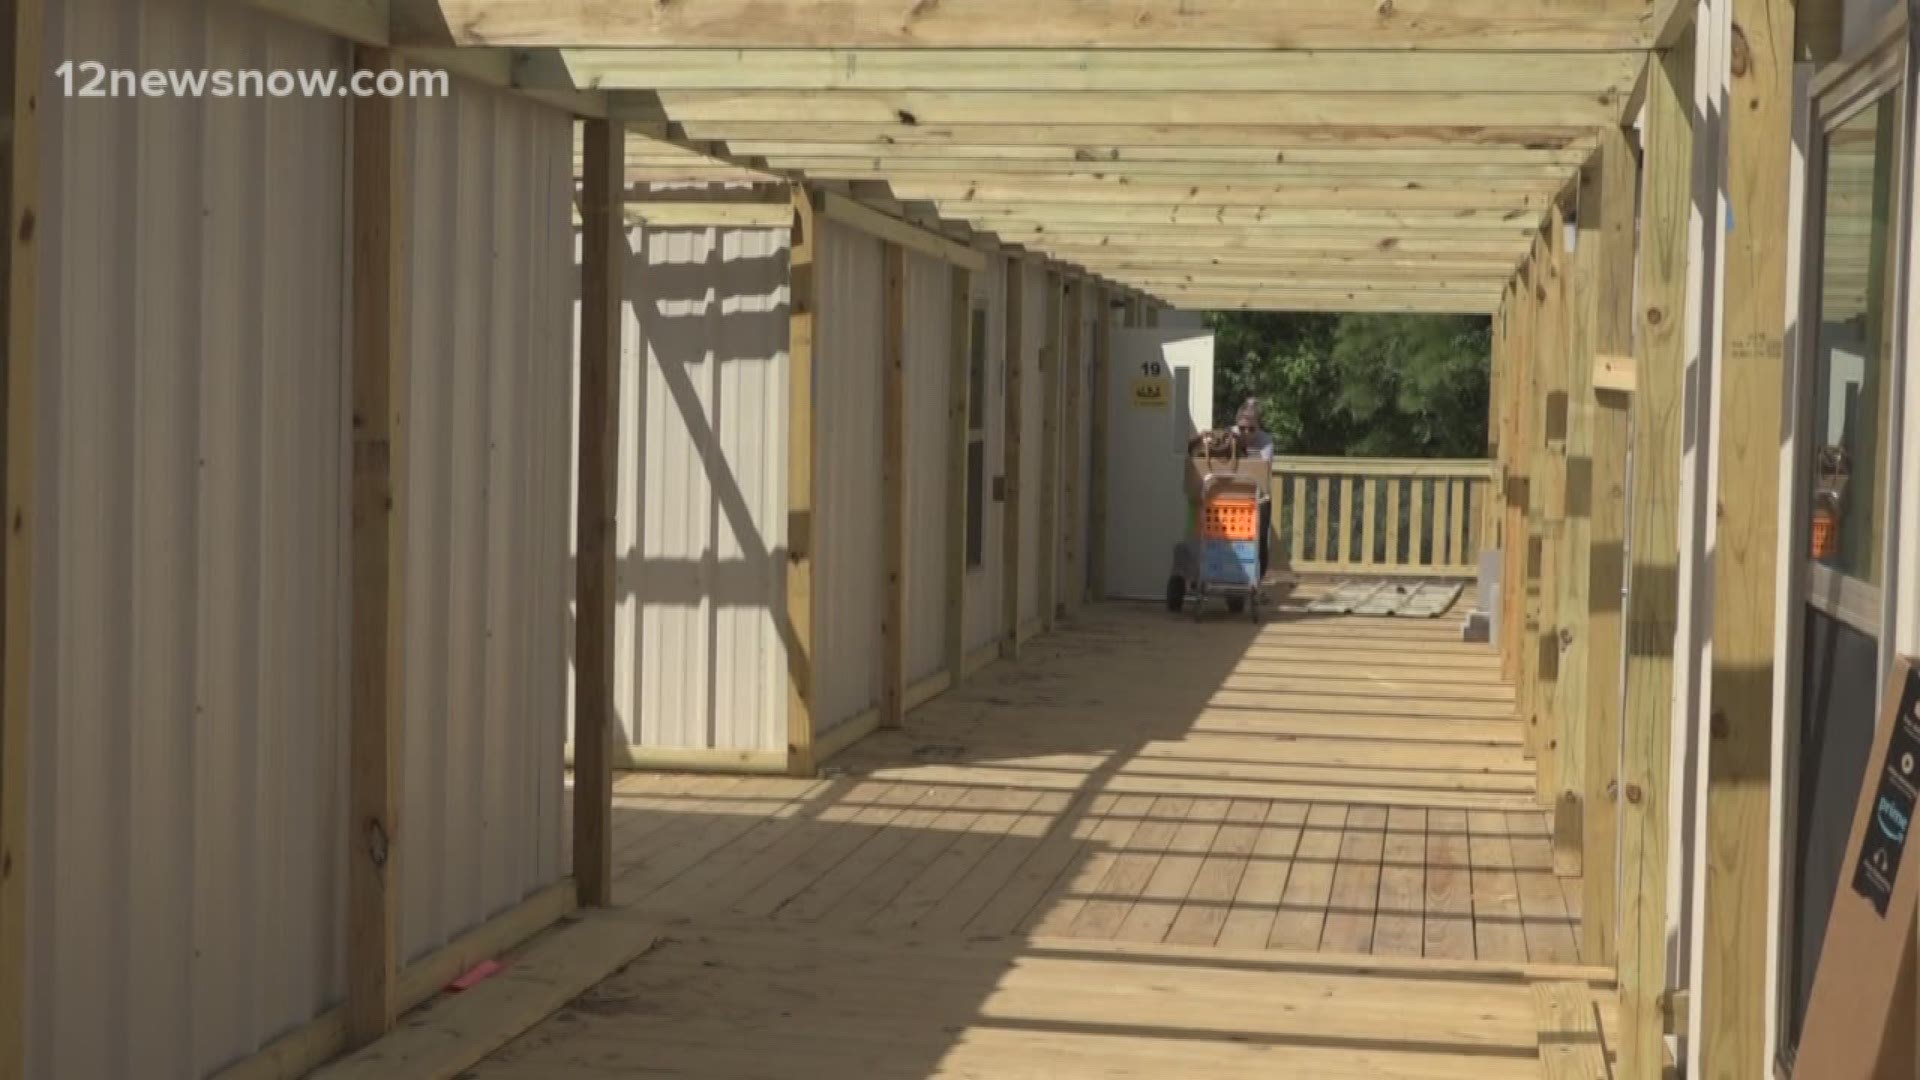 Vidor junior high teachers moved into portable buildings today, one year after Harvey